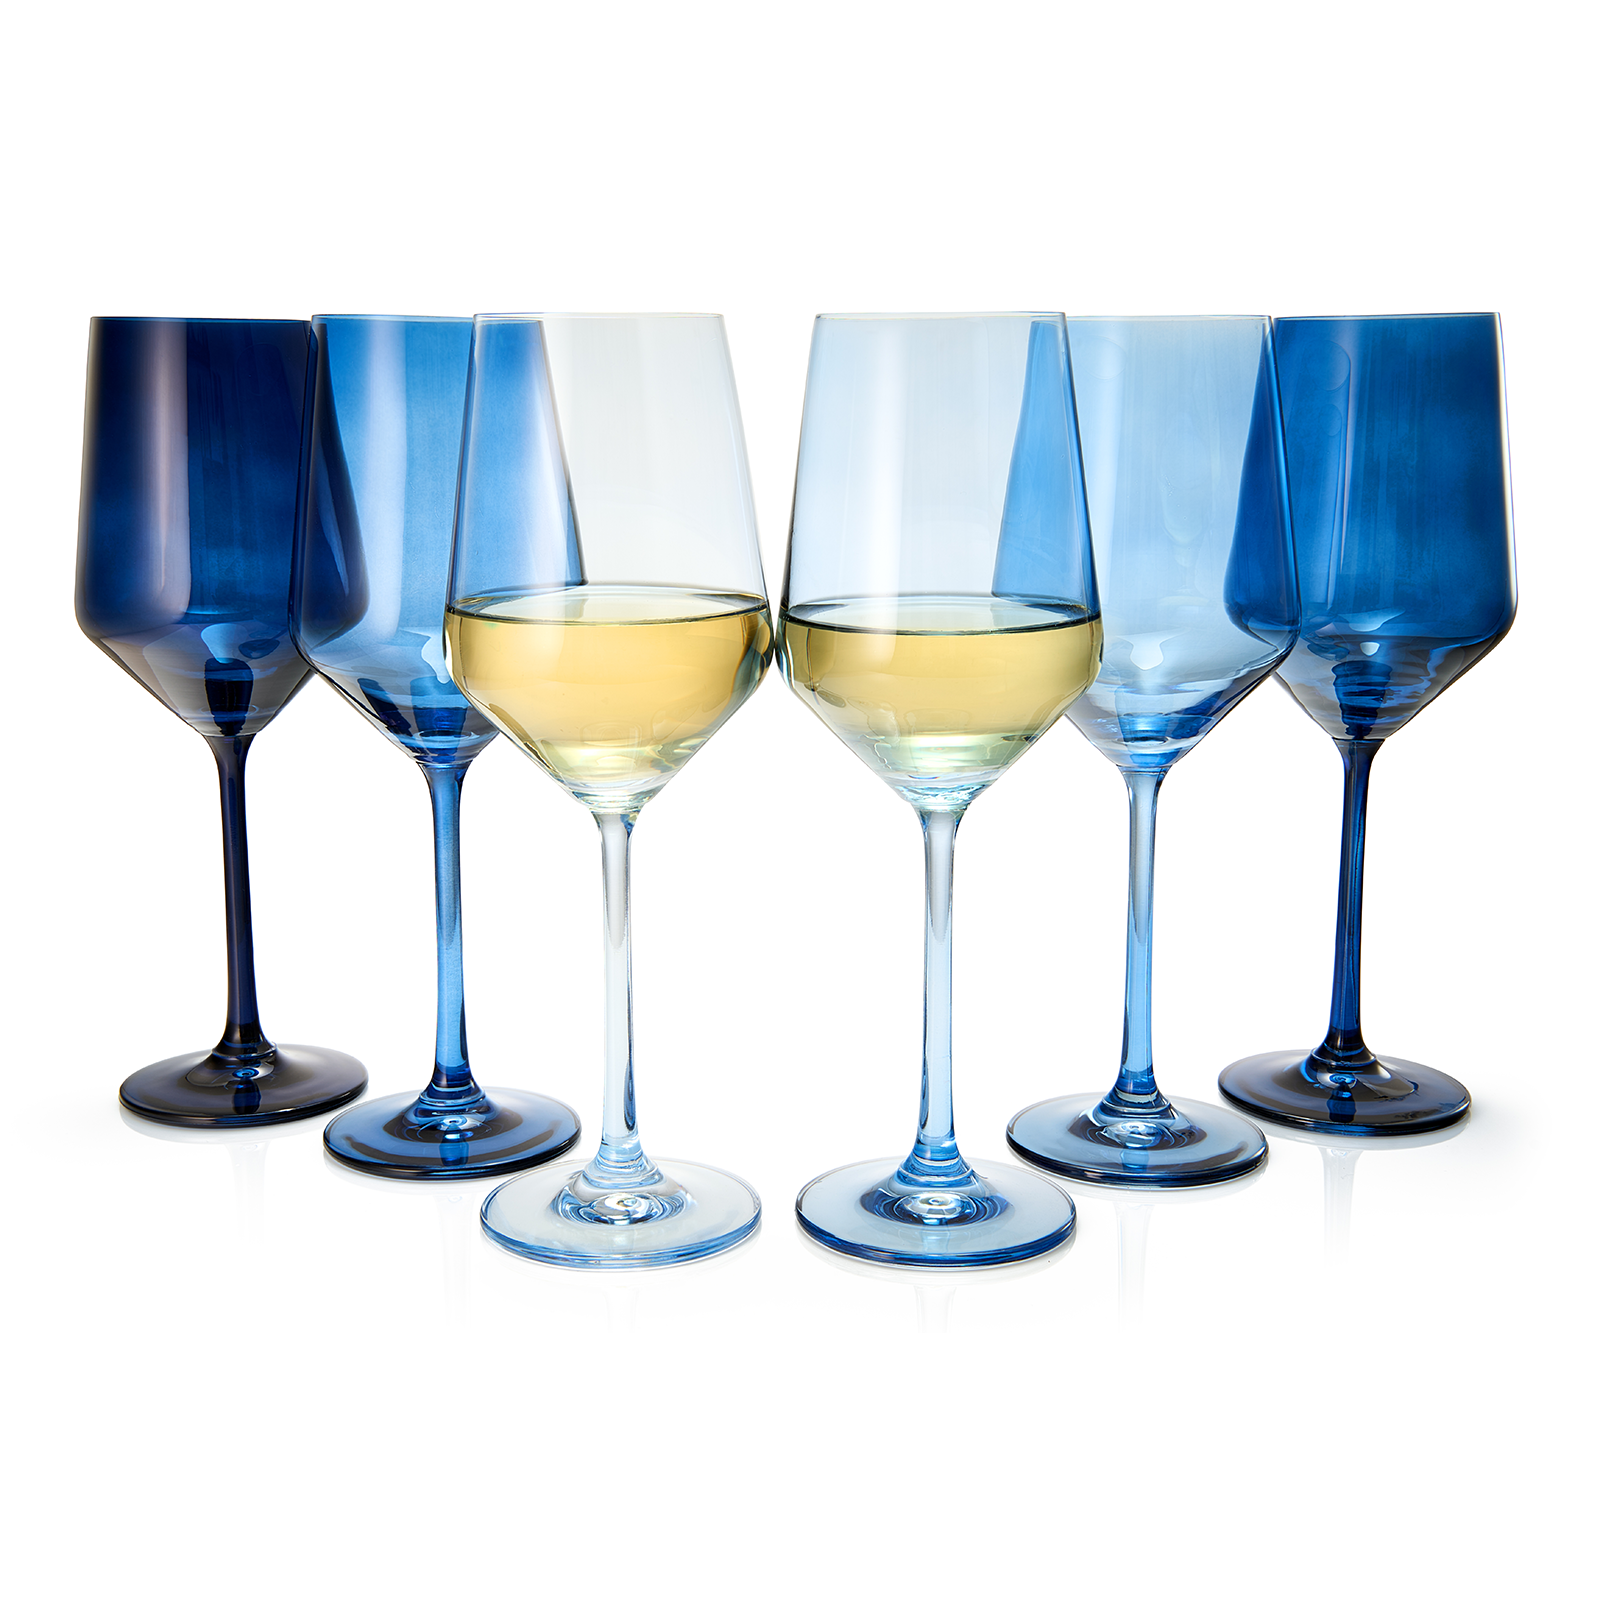 Colored Wine Glass Set, 12oz Glasses Set of 6 For All Occasions & Special Celebrations Gift For Him, Her, Wife, Friend Drinkware Unique Style Tall Stemmed for White & Red Wine Elegant Glassware (Blue)-3